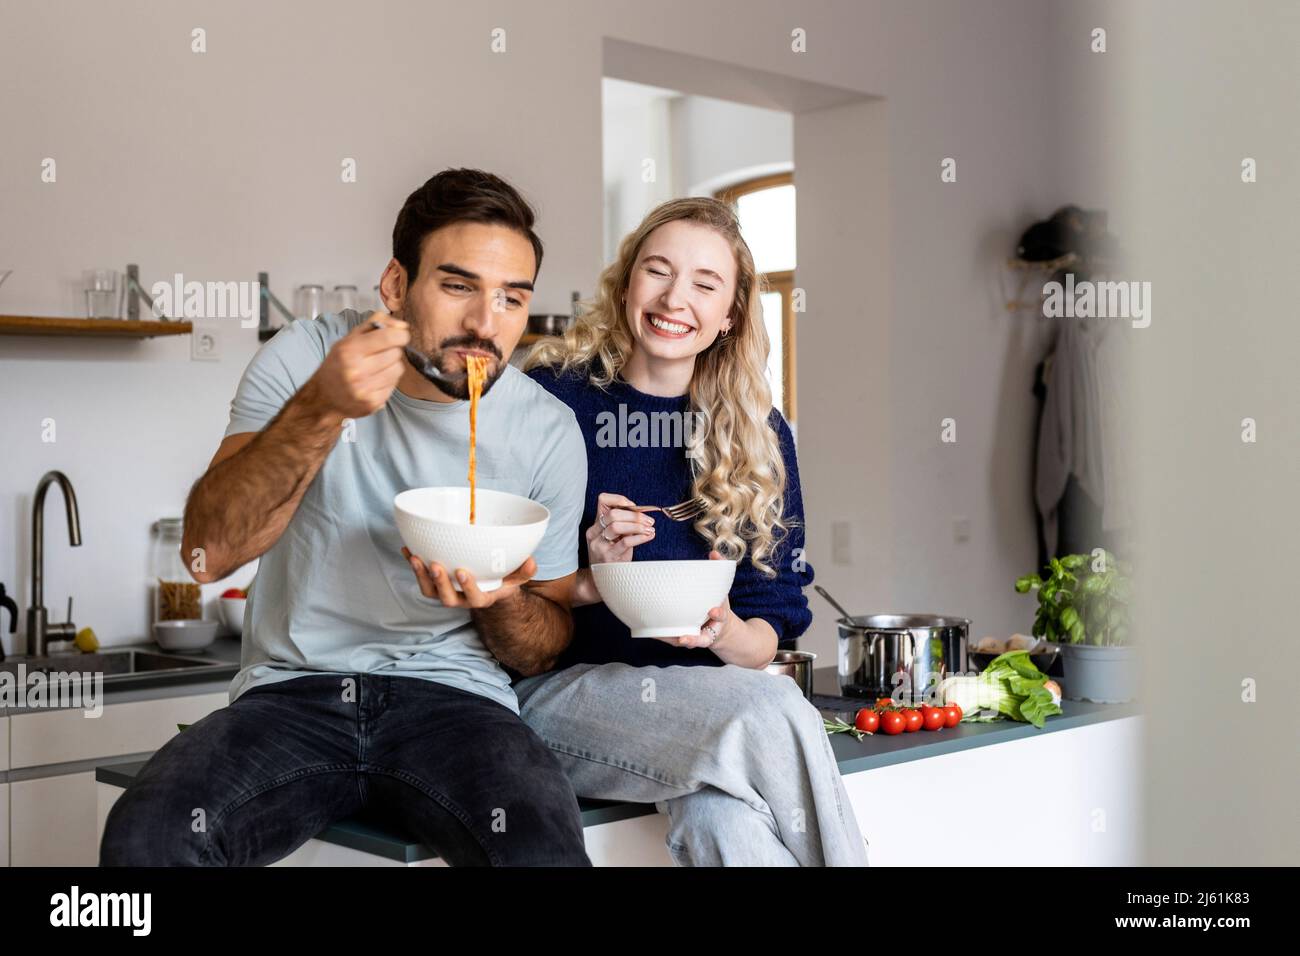 Smiling woman sitting by man eating noodles from bowl in kitchen at home Stock Photo